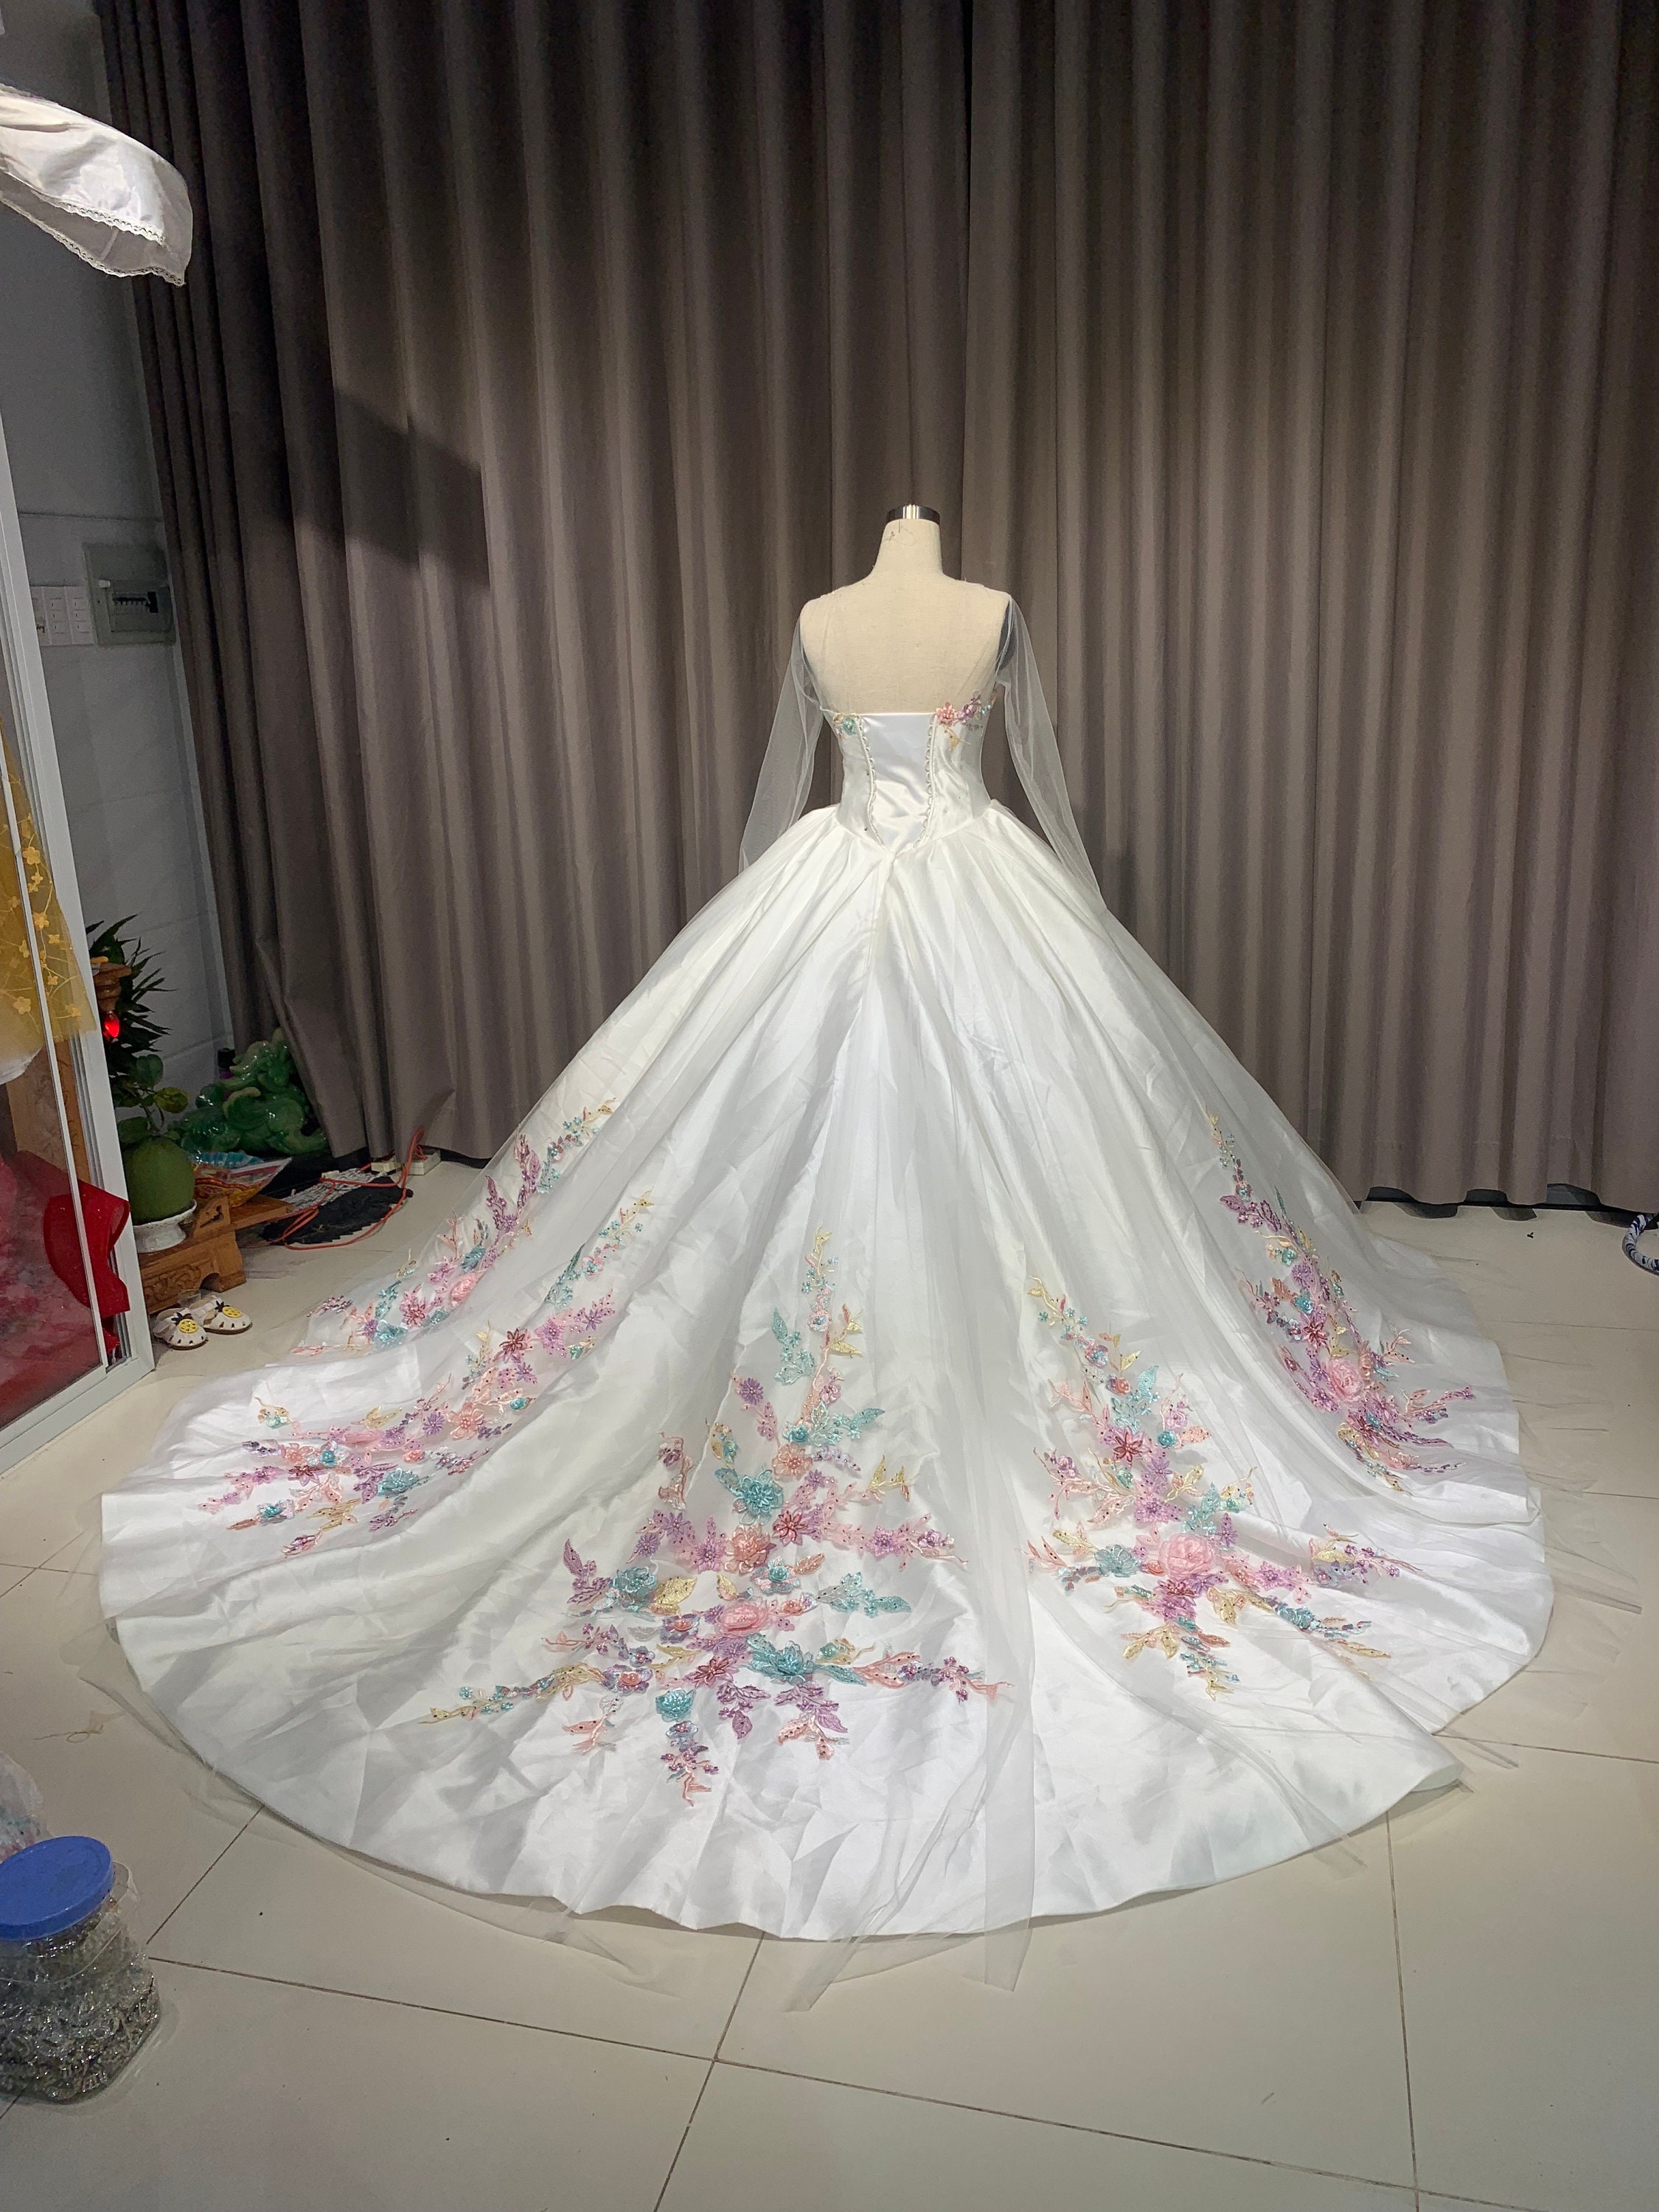 Disney Wedding Dresses 2020 Fairy Tale Gowns Revealed - EverythingMouse  Guide To Disney